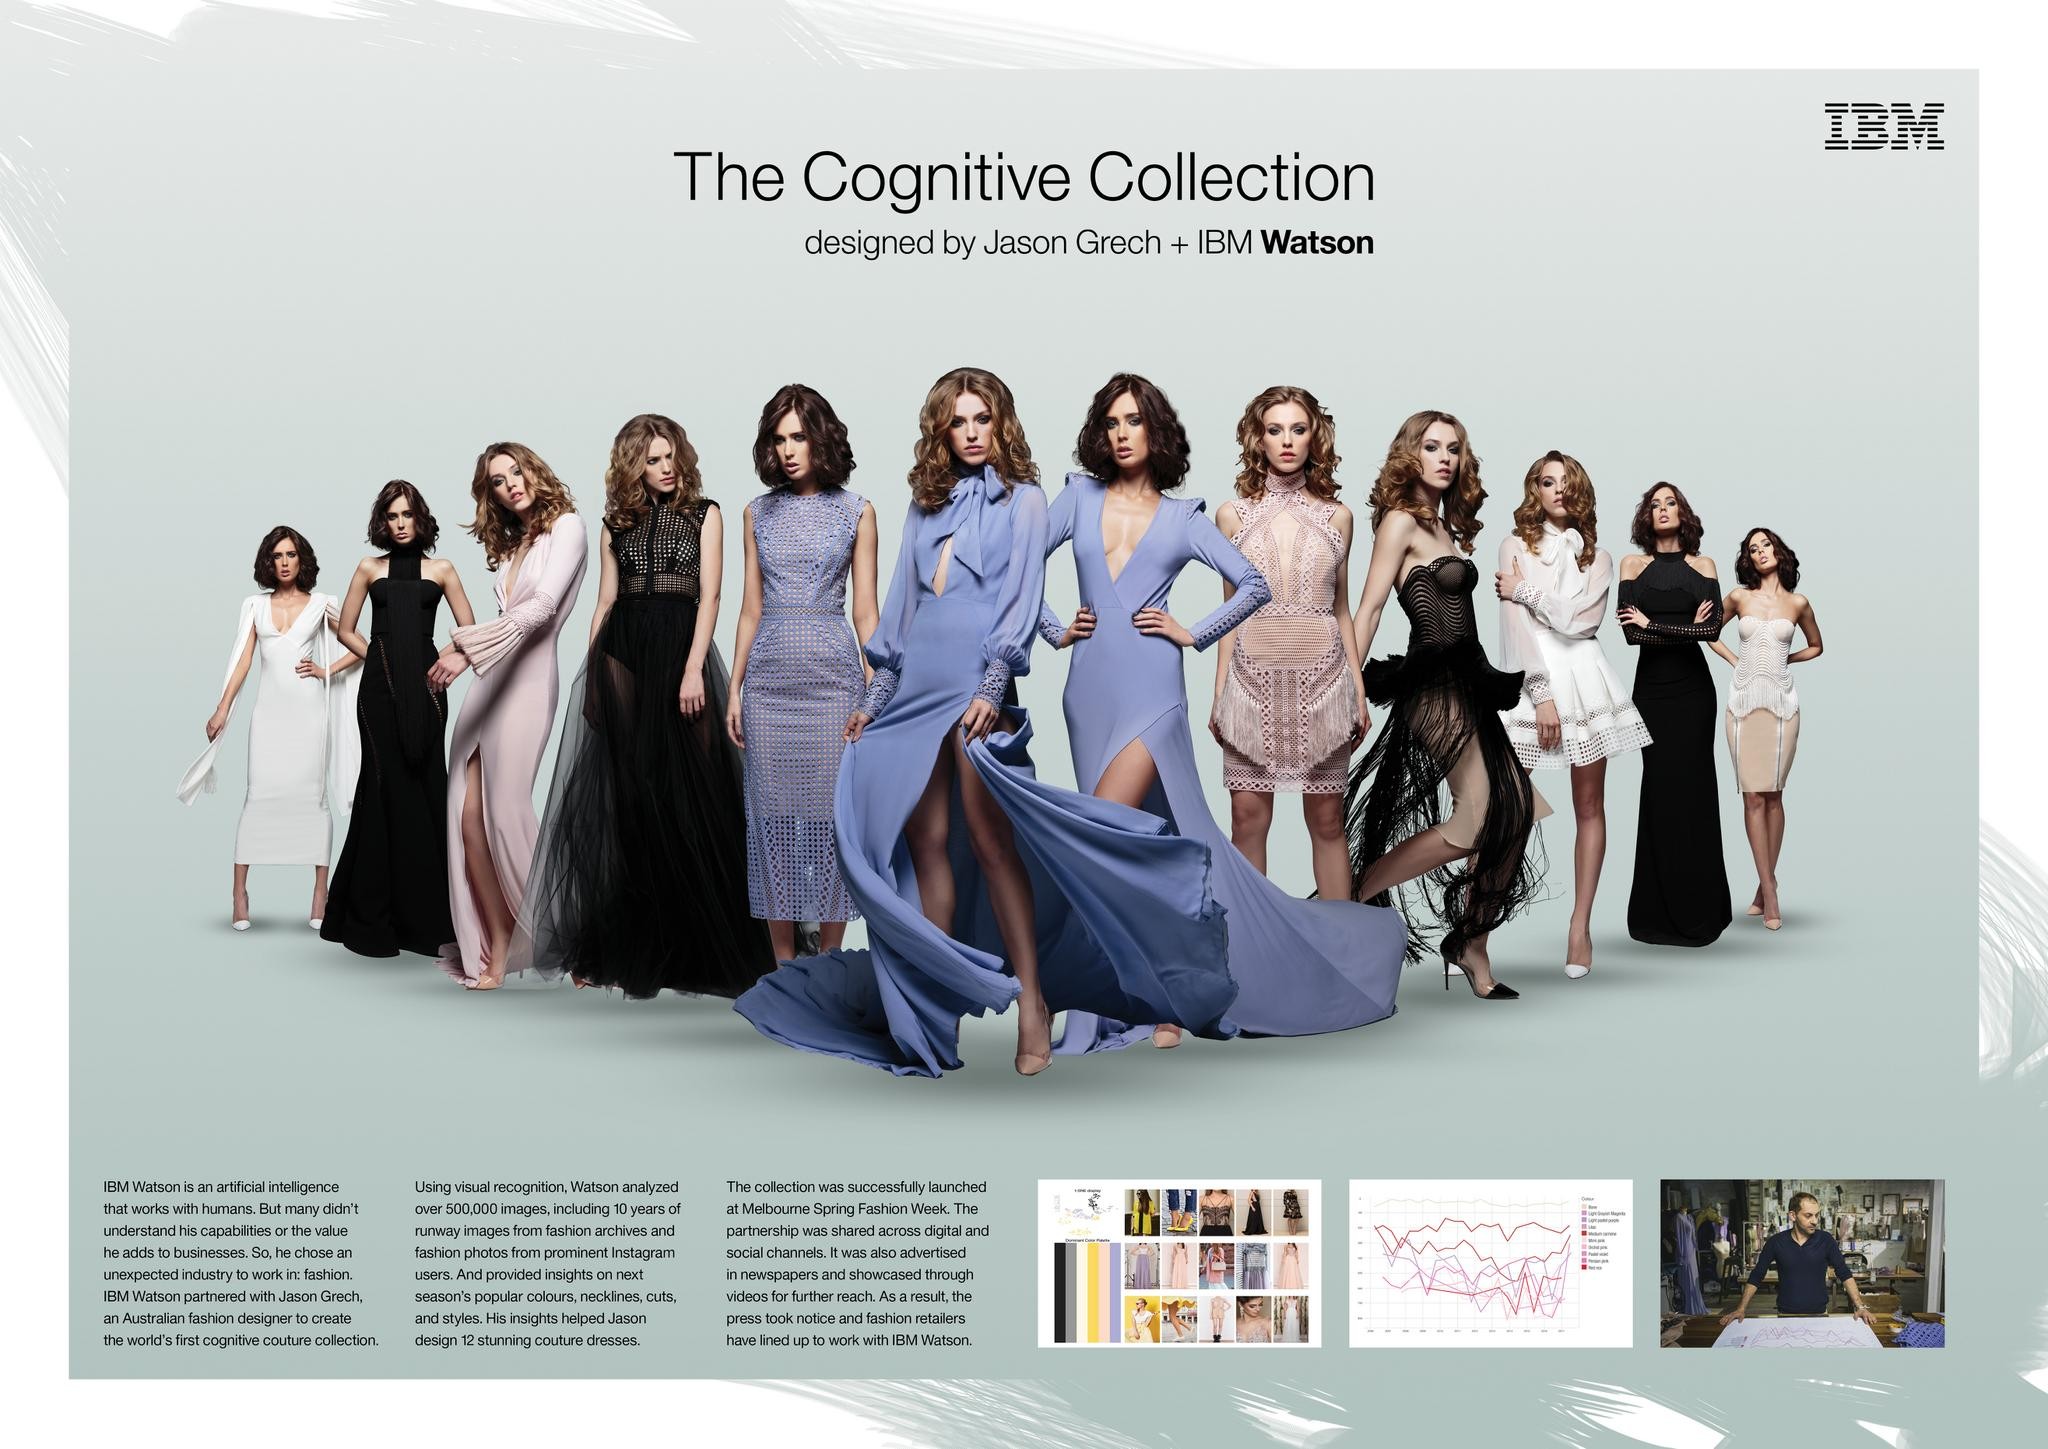 THE COGNITIVE COLLECTION DESIGNED BY JASON GRECH + IBM WATSON